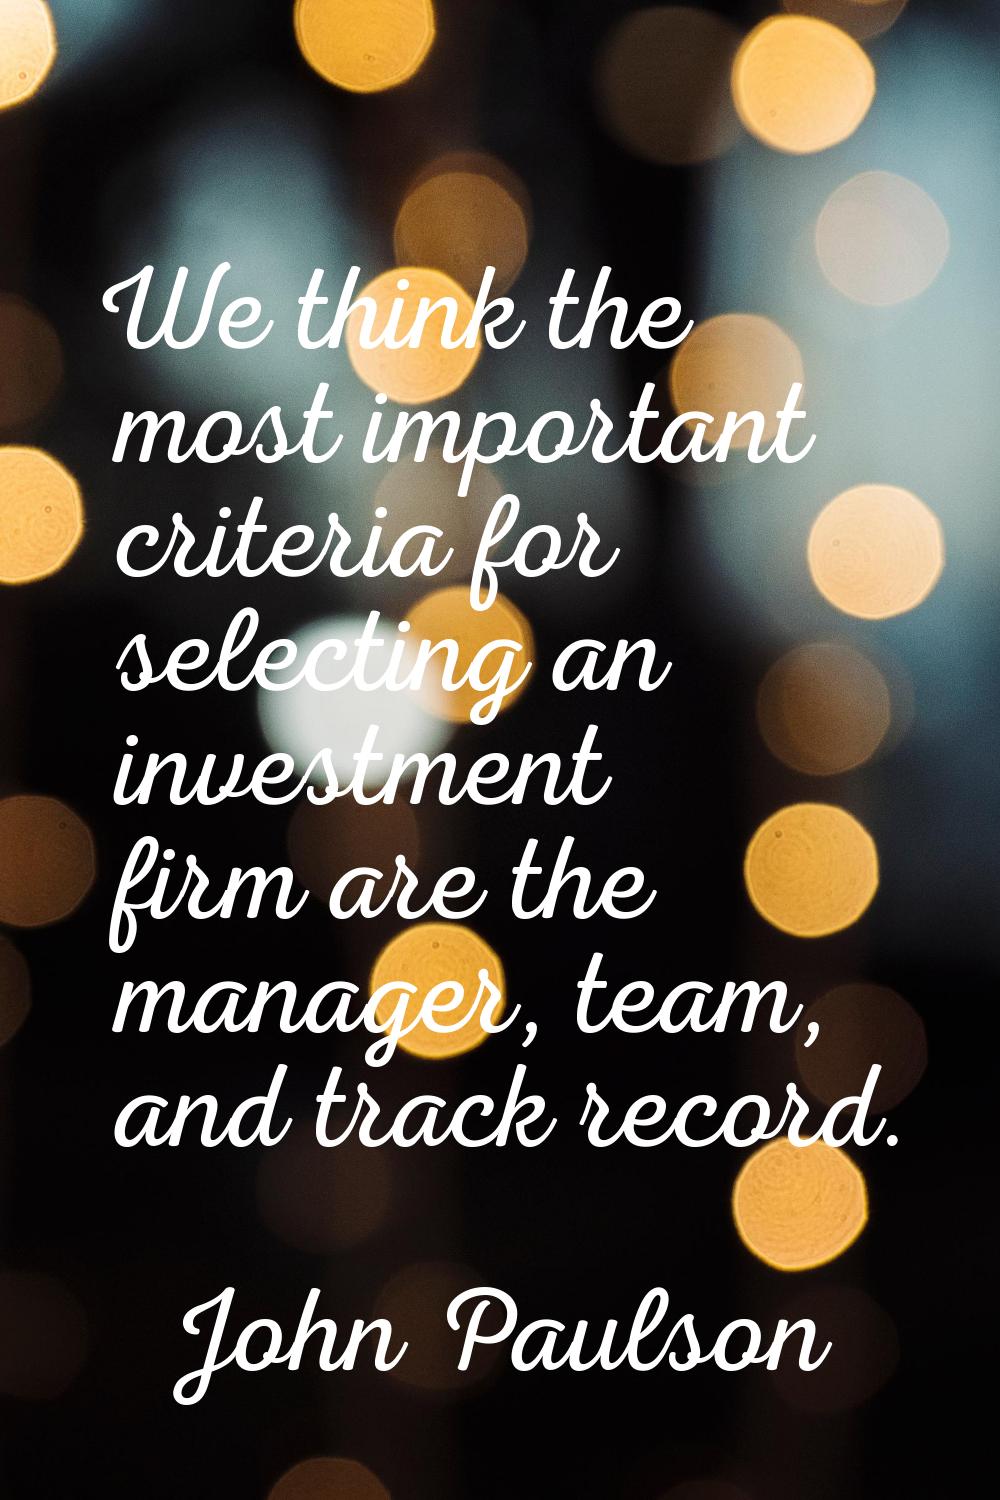 We think the most important criteria for selecting an investment firm are the manager, team, and tr